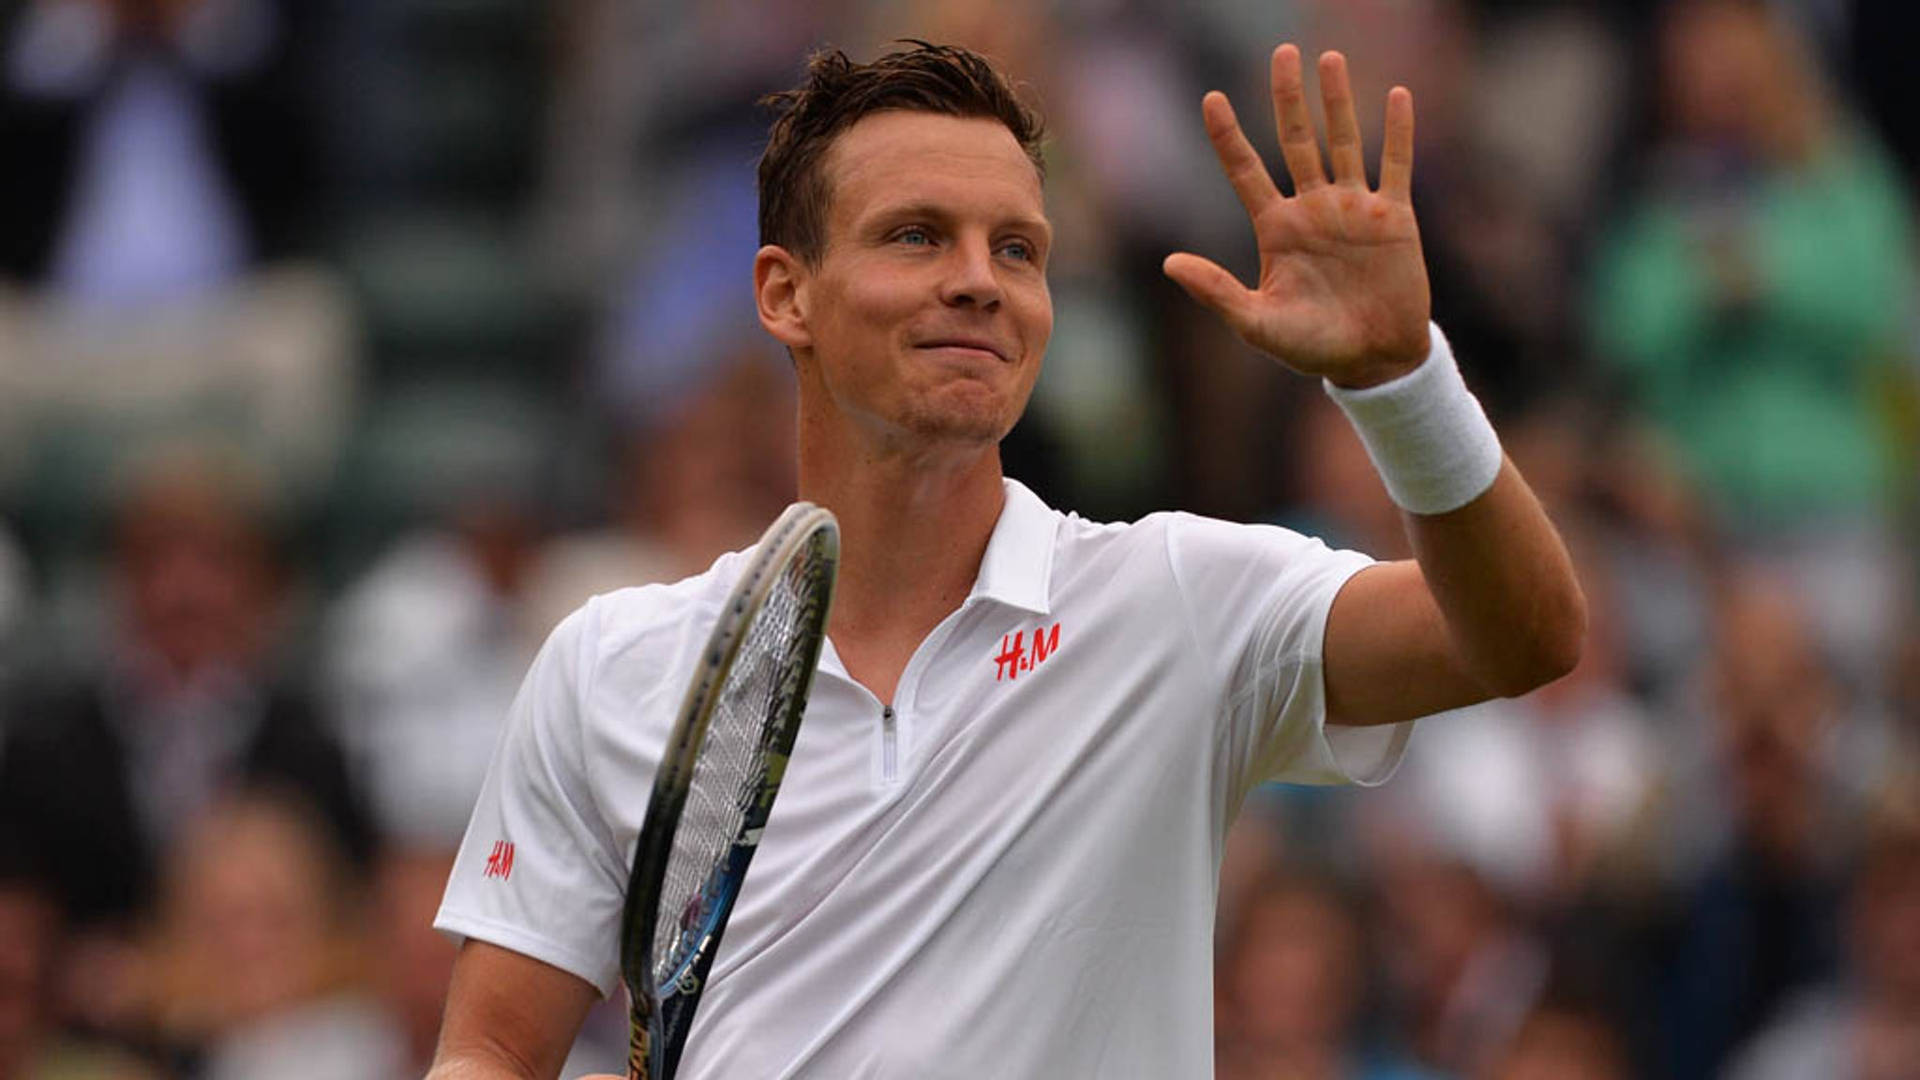 Tomas Berdych Acknowledges His Fans After a Match Wallpaper